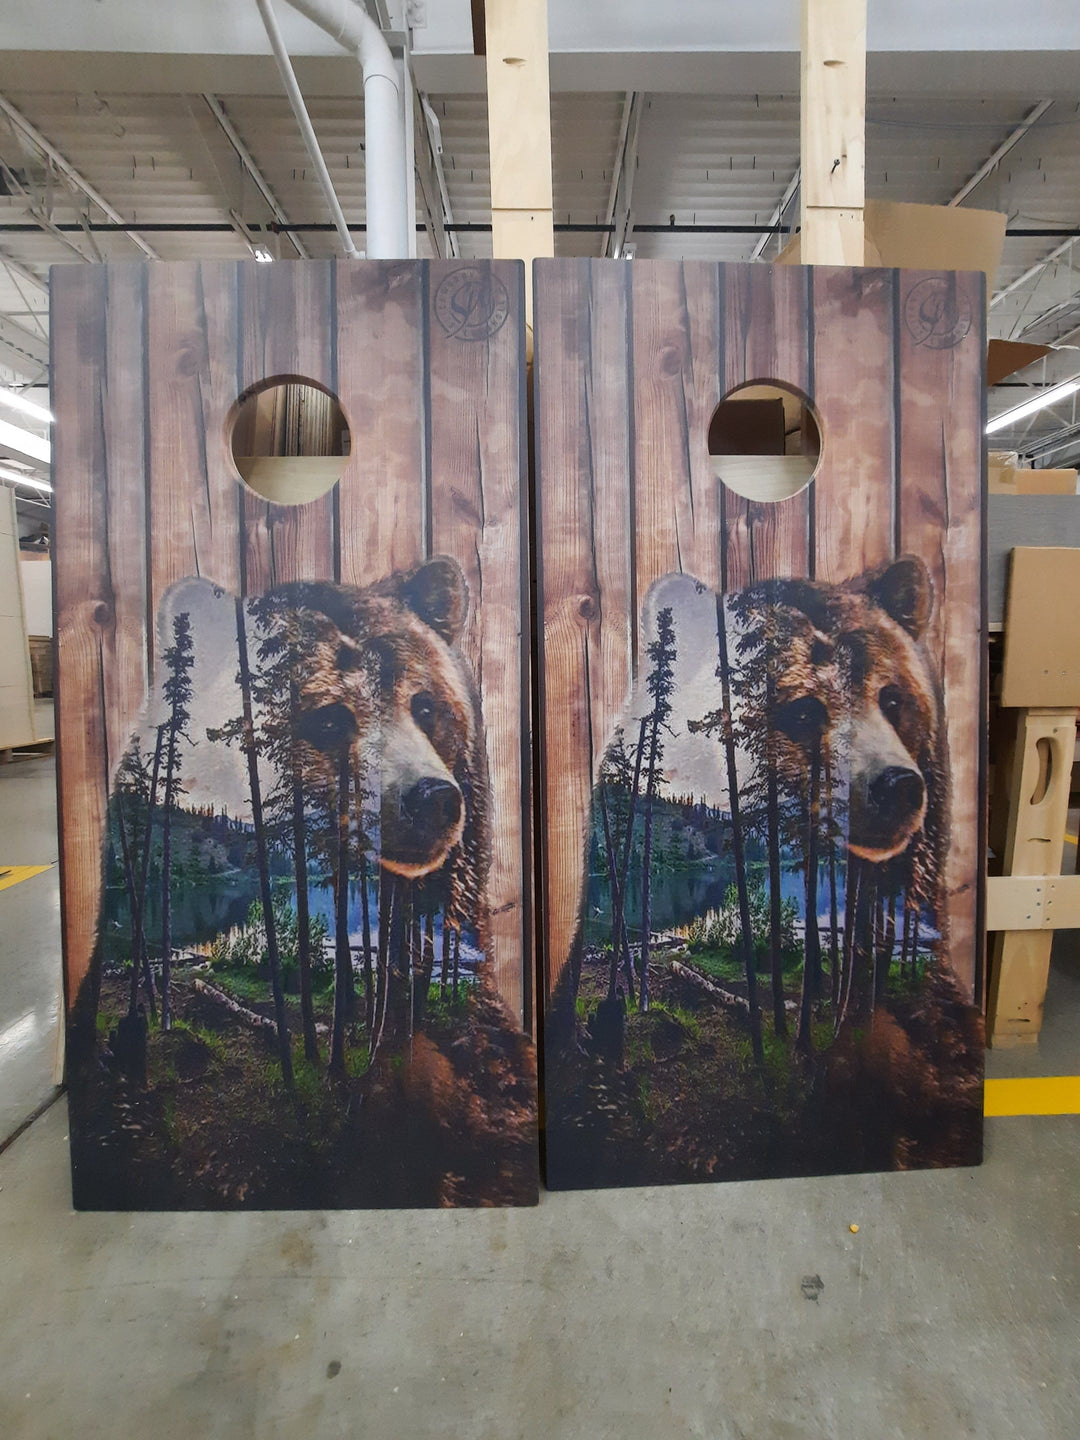 Slick Woody’s Scratch and Dent Scratch and Dent 2x4 Bear Mountain Regulation Cornhole Board Set (Includes 8 Bags)/ DTRBBM2